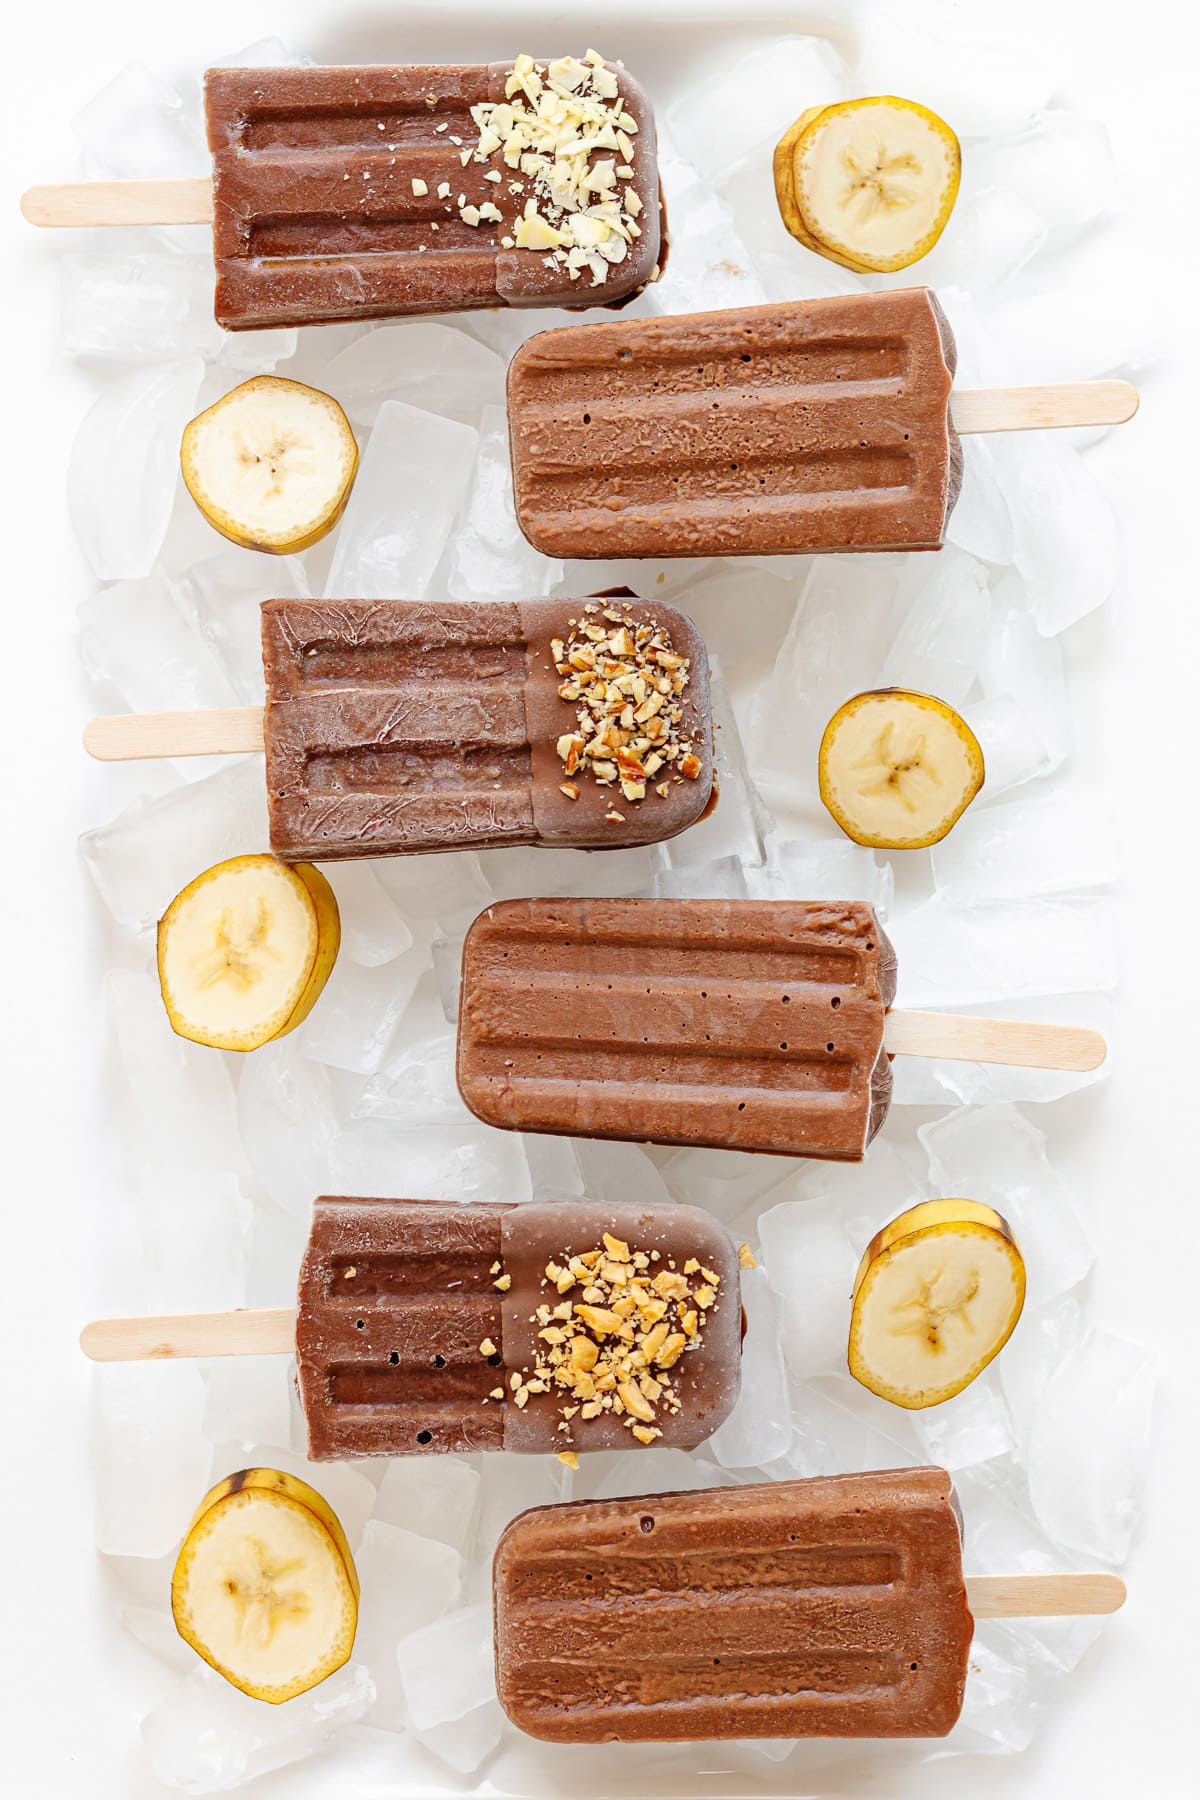 Chocolate banana popsicles sitting on a white platter of ice with banana slices.